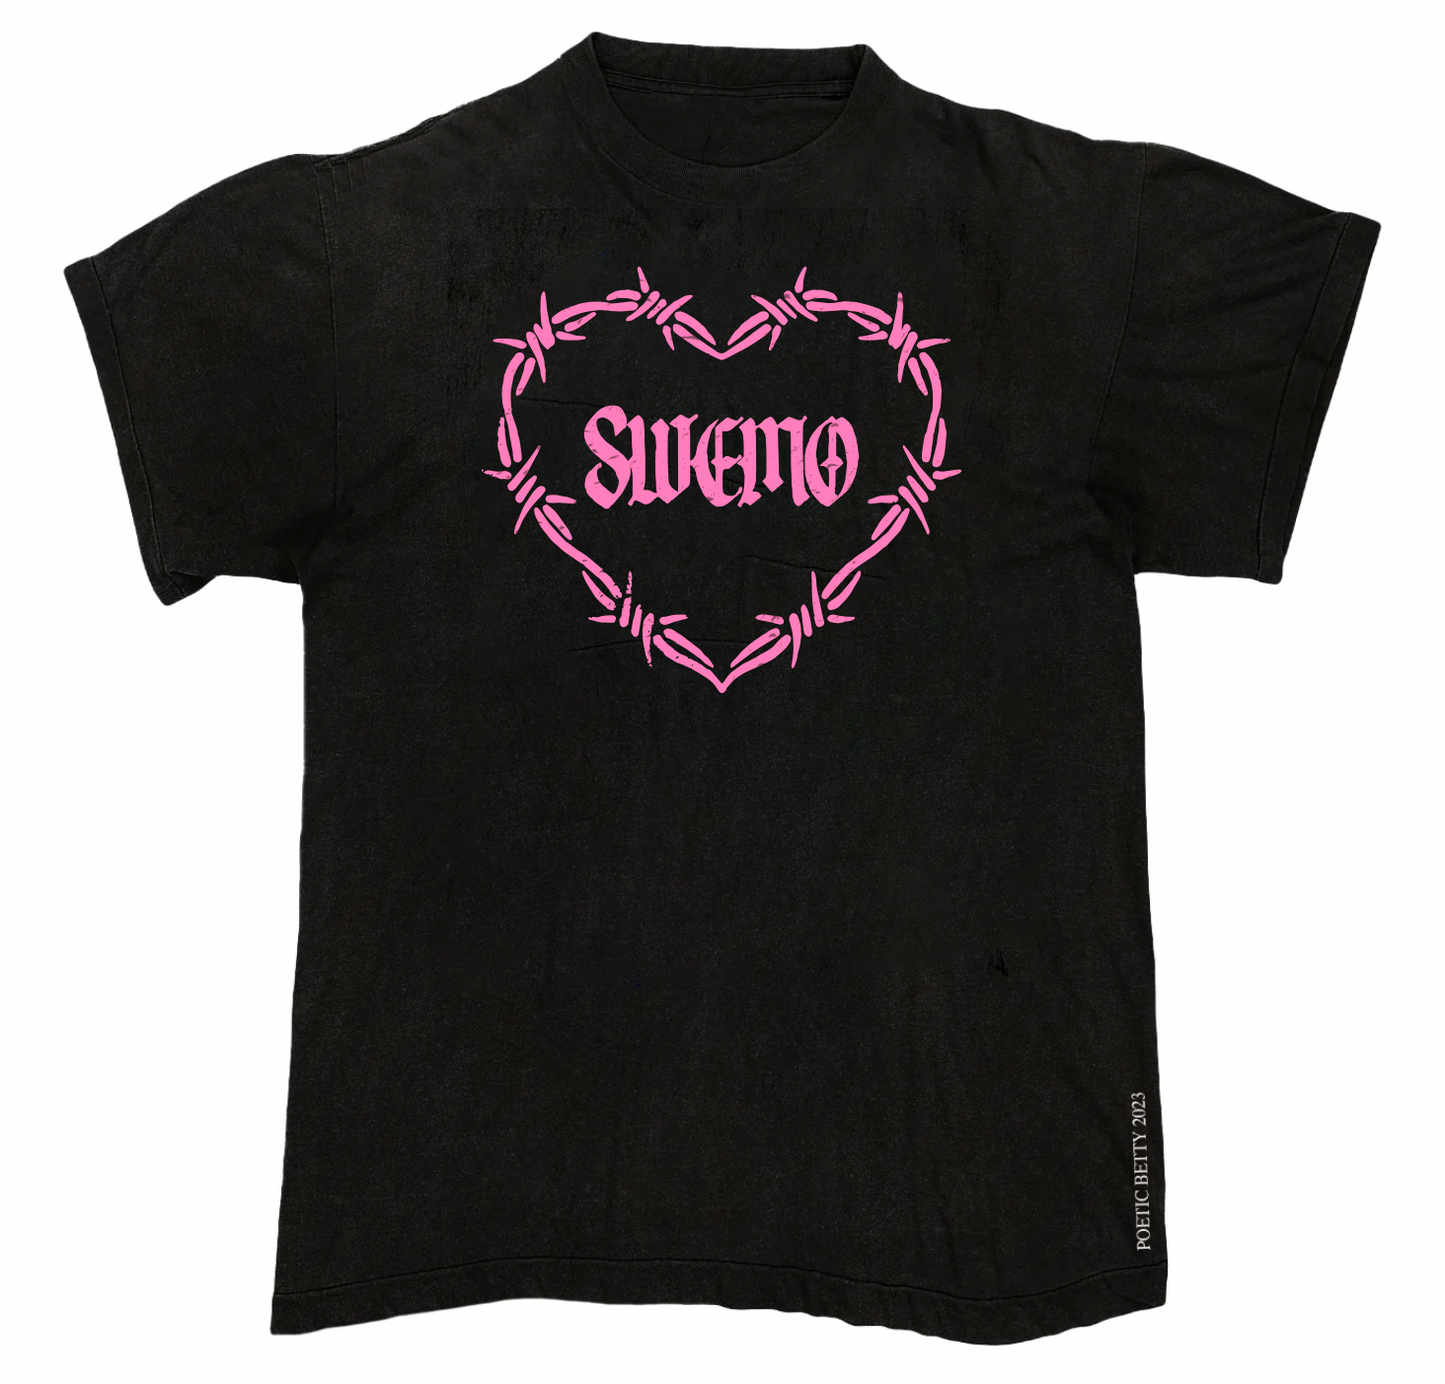 Swemo For Fans of Taylor Swift and Emo Black Unisex T-Shirt